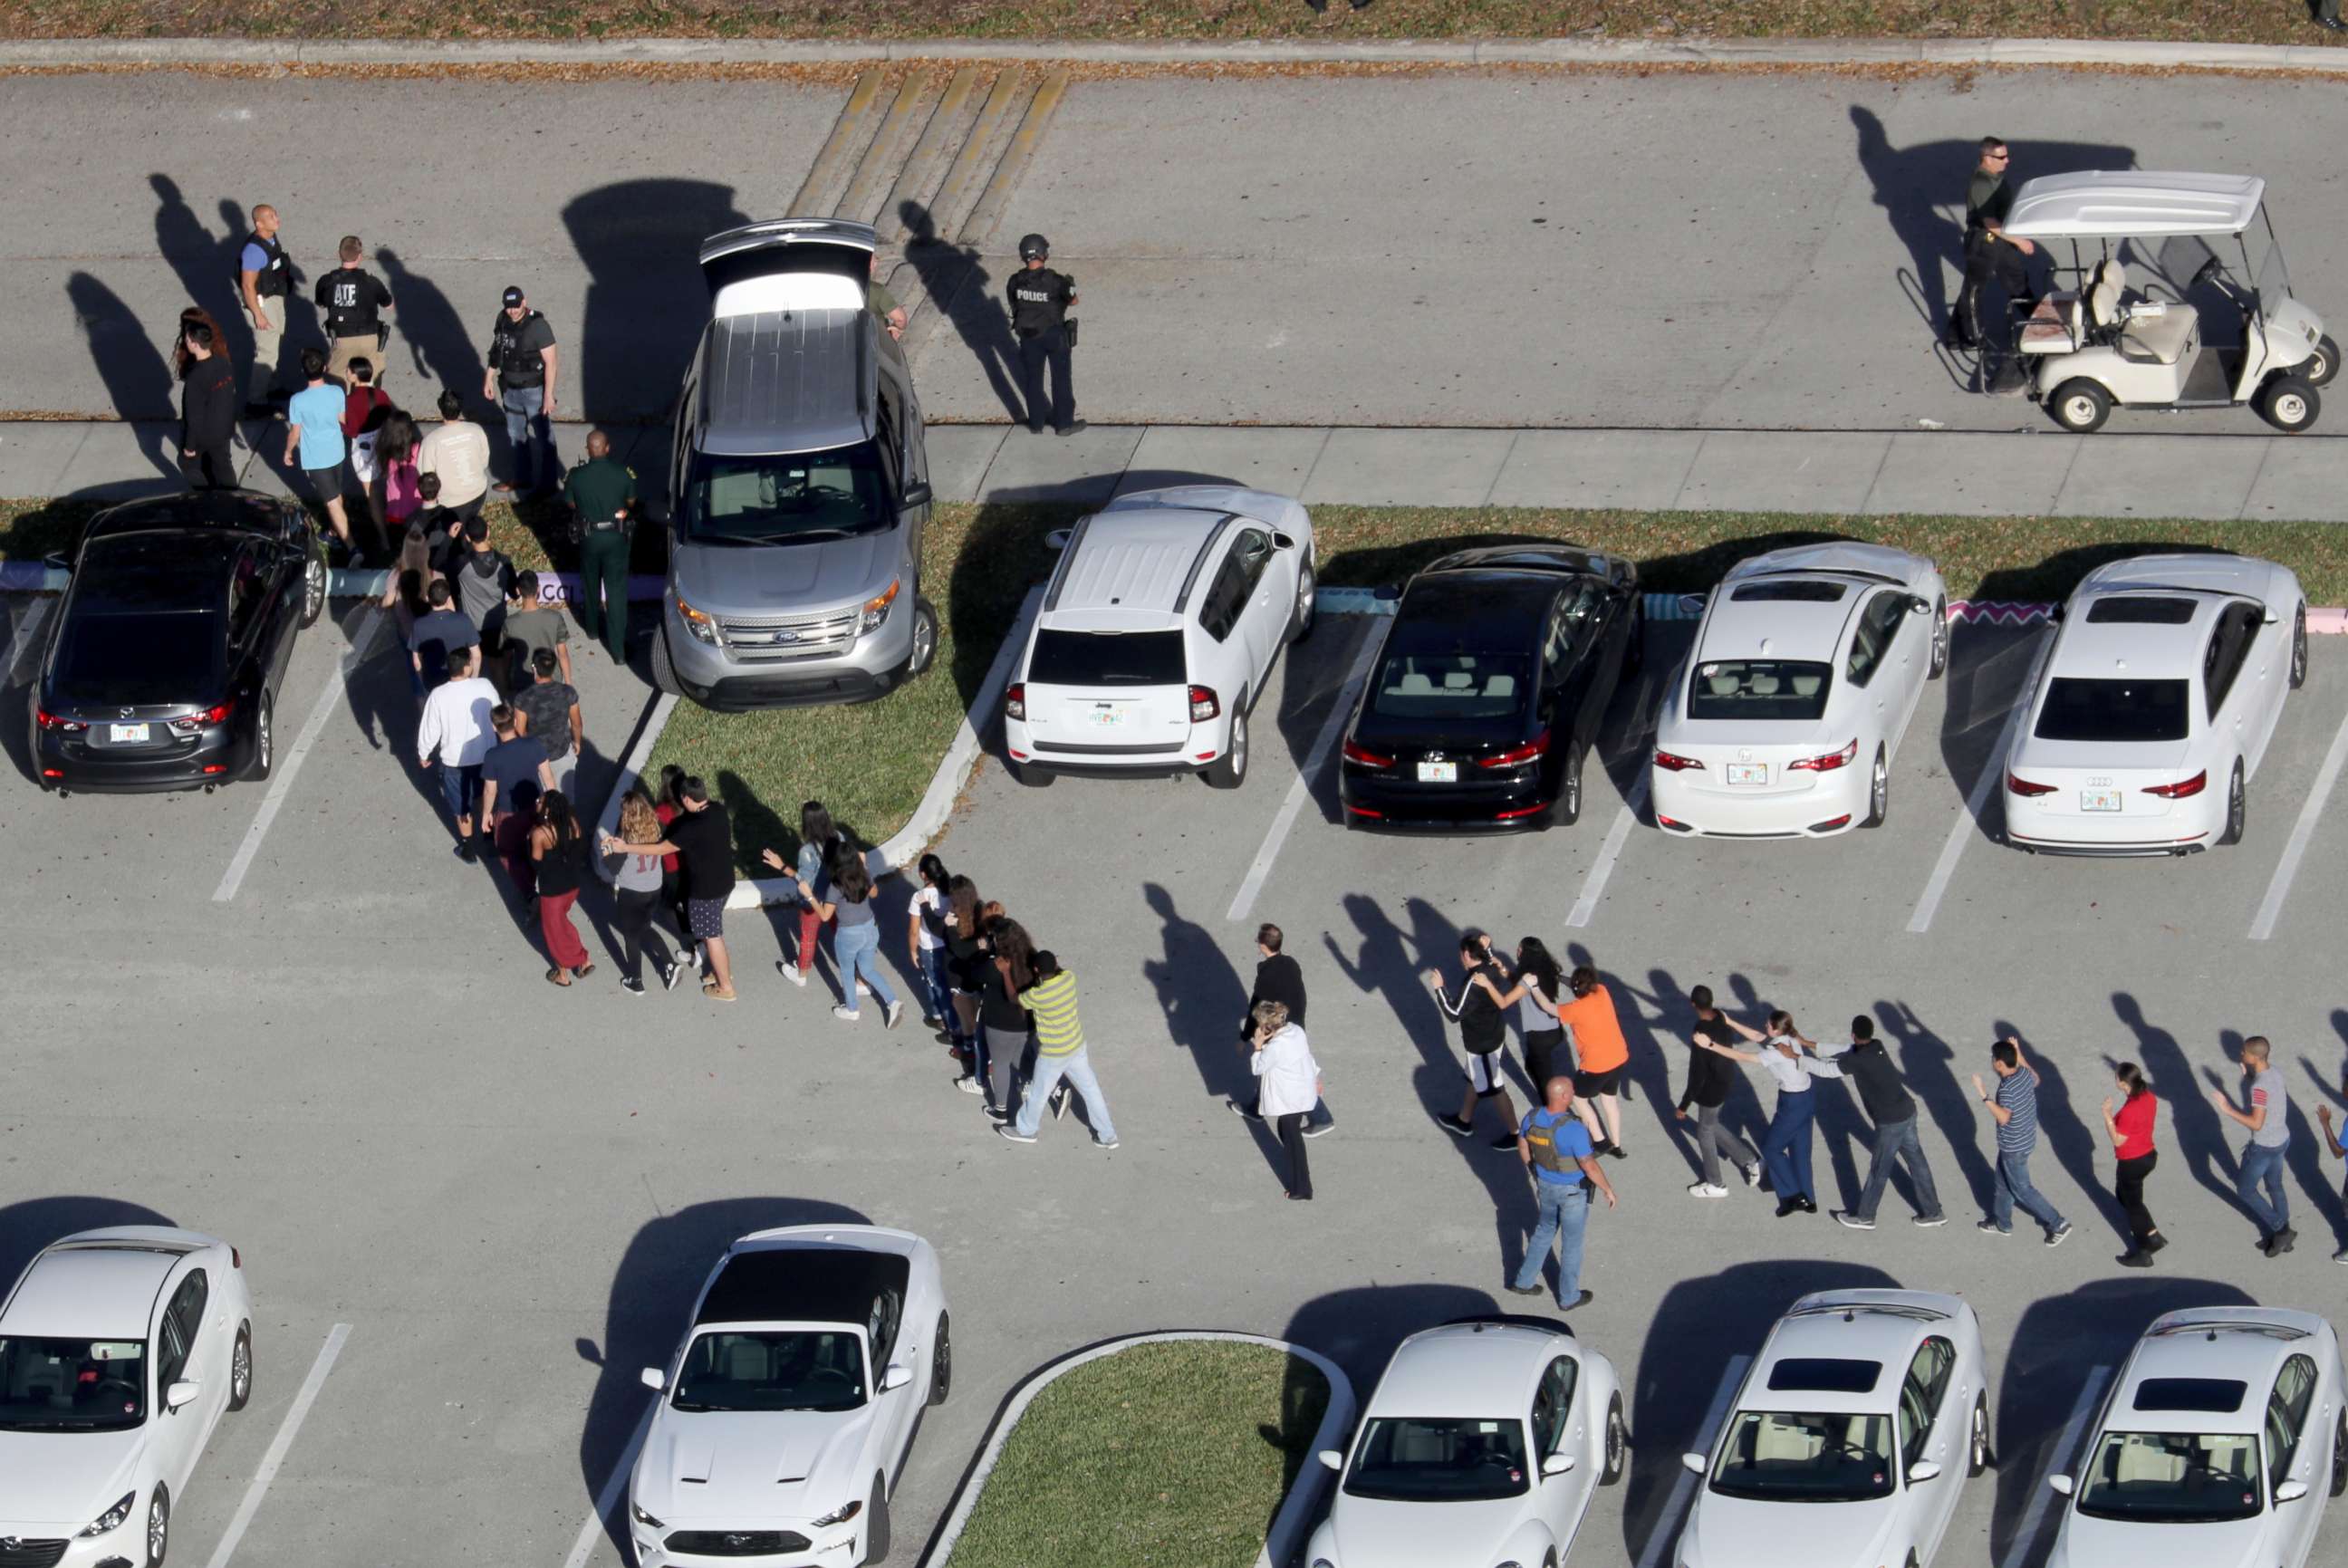 PHOTO: Students are evacuated by police from Marjory Stoneman Douglas High School in Parkland, Fla., after a mass shooting on Feb. 14, 2018.